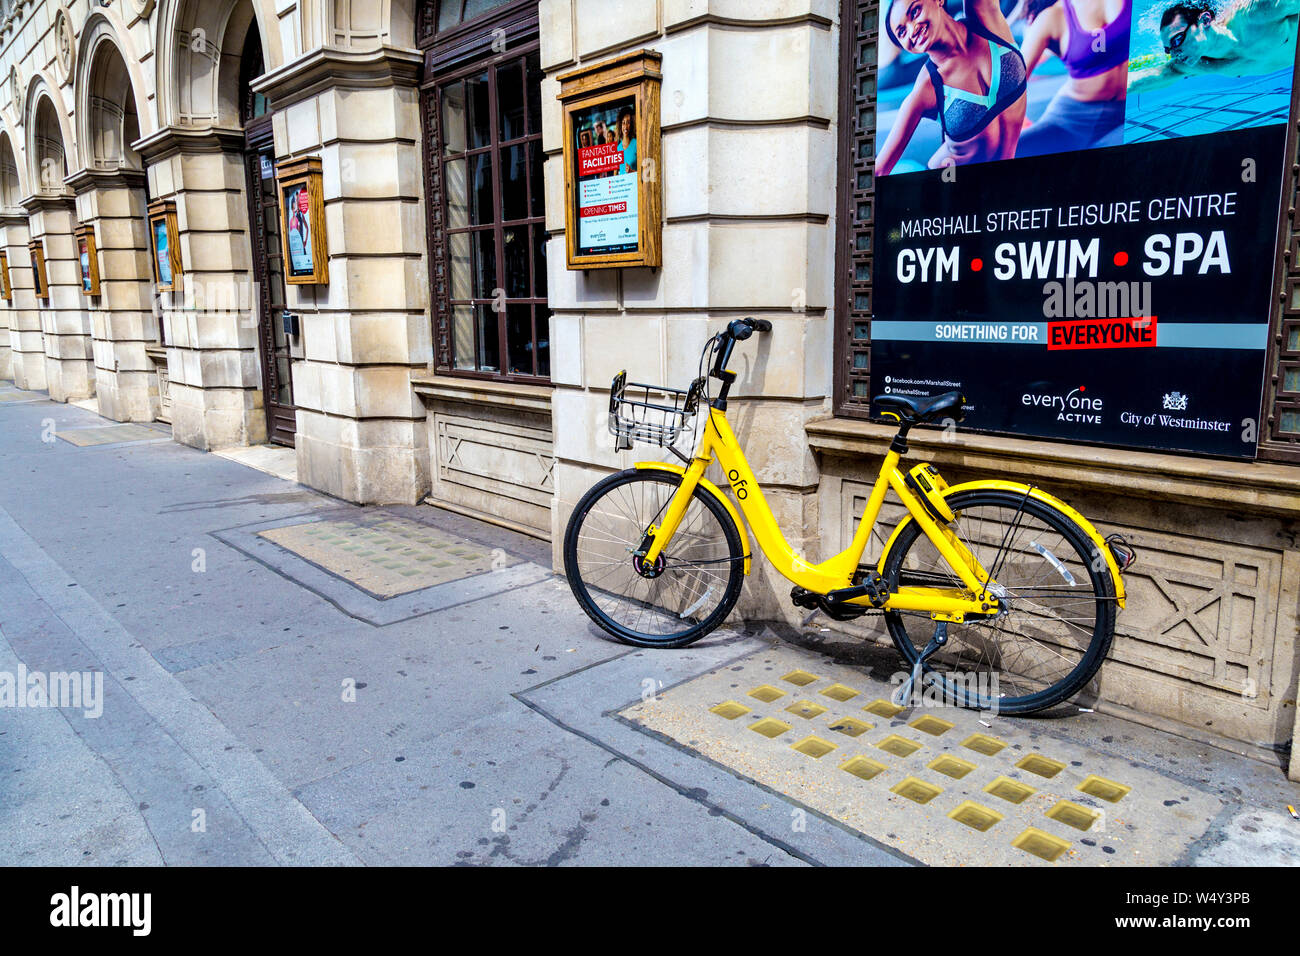 Yellow hire scheme dockless ofo bicycle parked on the street, London, UK Stock Photo